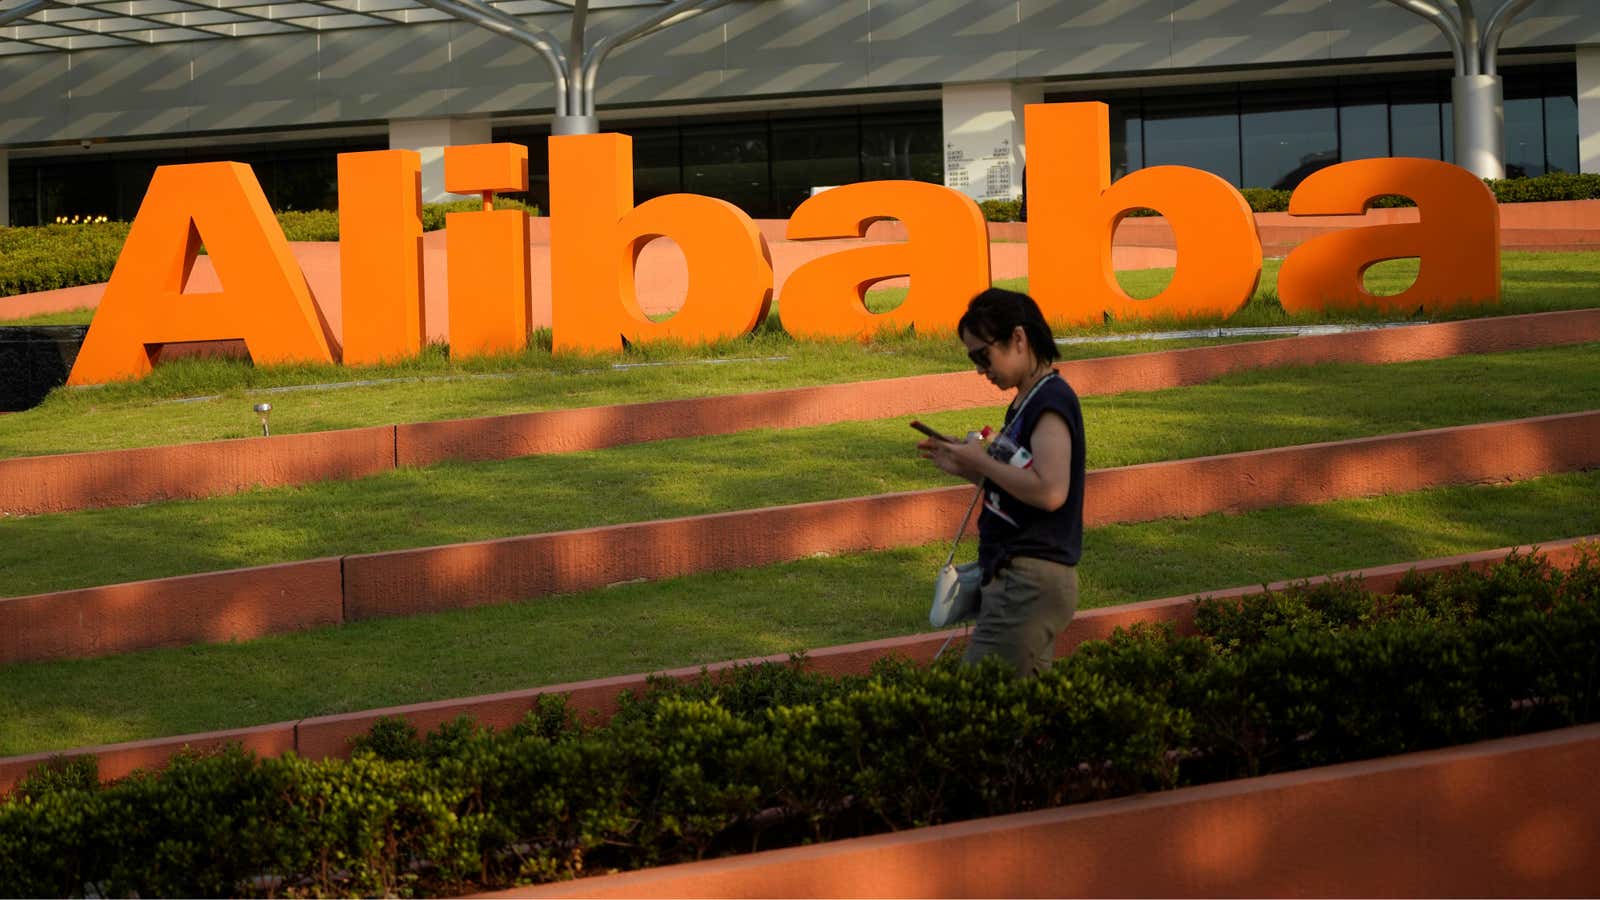 Alibaba’s revenues are surging.